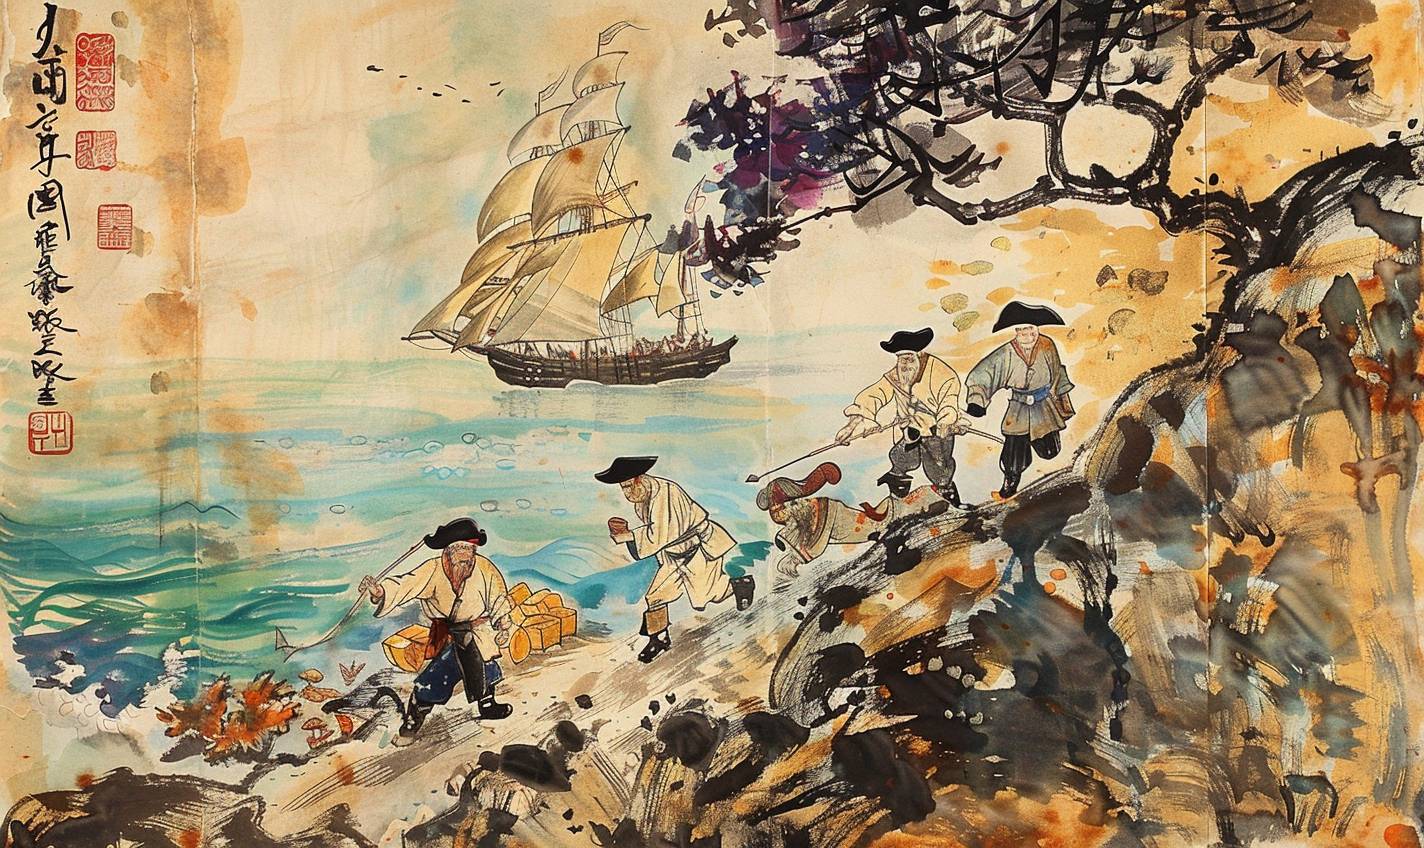 In the style of Qi Baishi, a pirate crew burying treasure on a deserted island